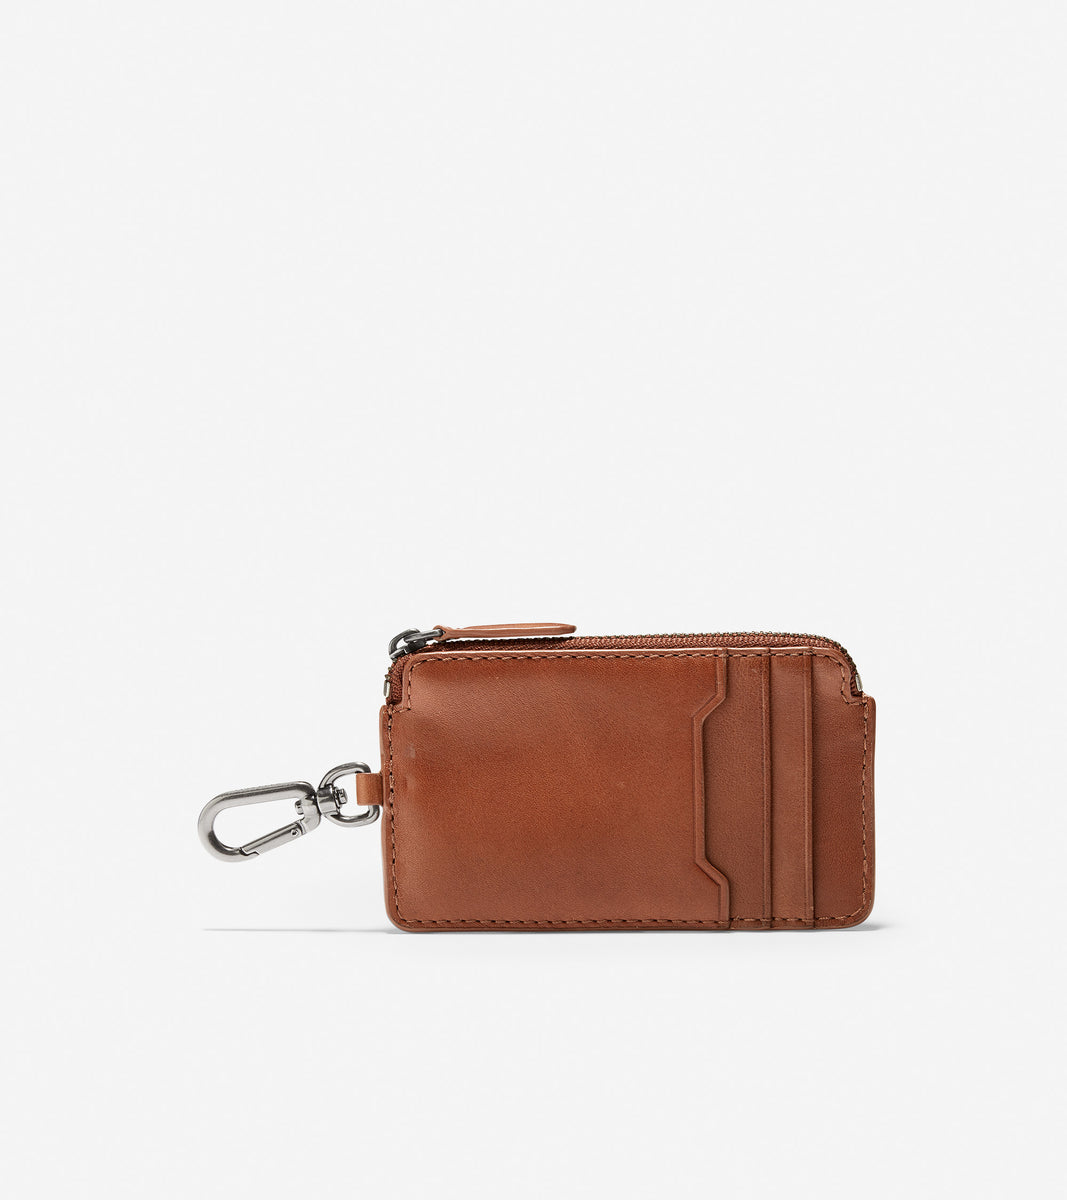 ColeHaan-GRANDSERIES Leather Zip Card Case With Key Ring-f11441-British Tan